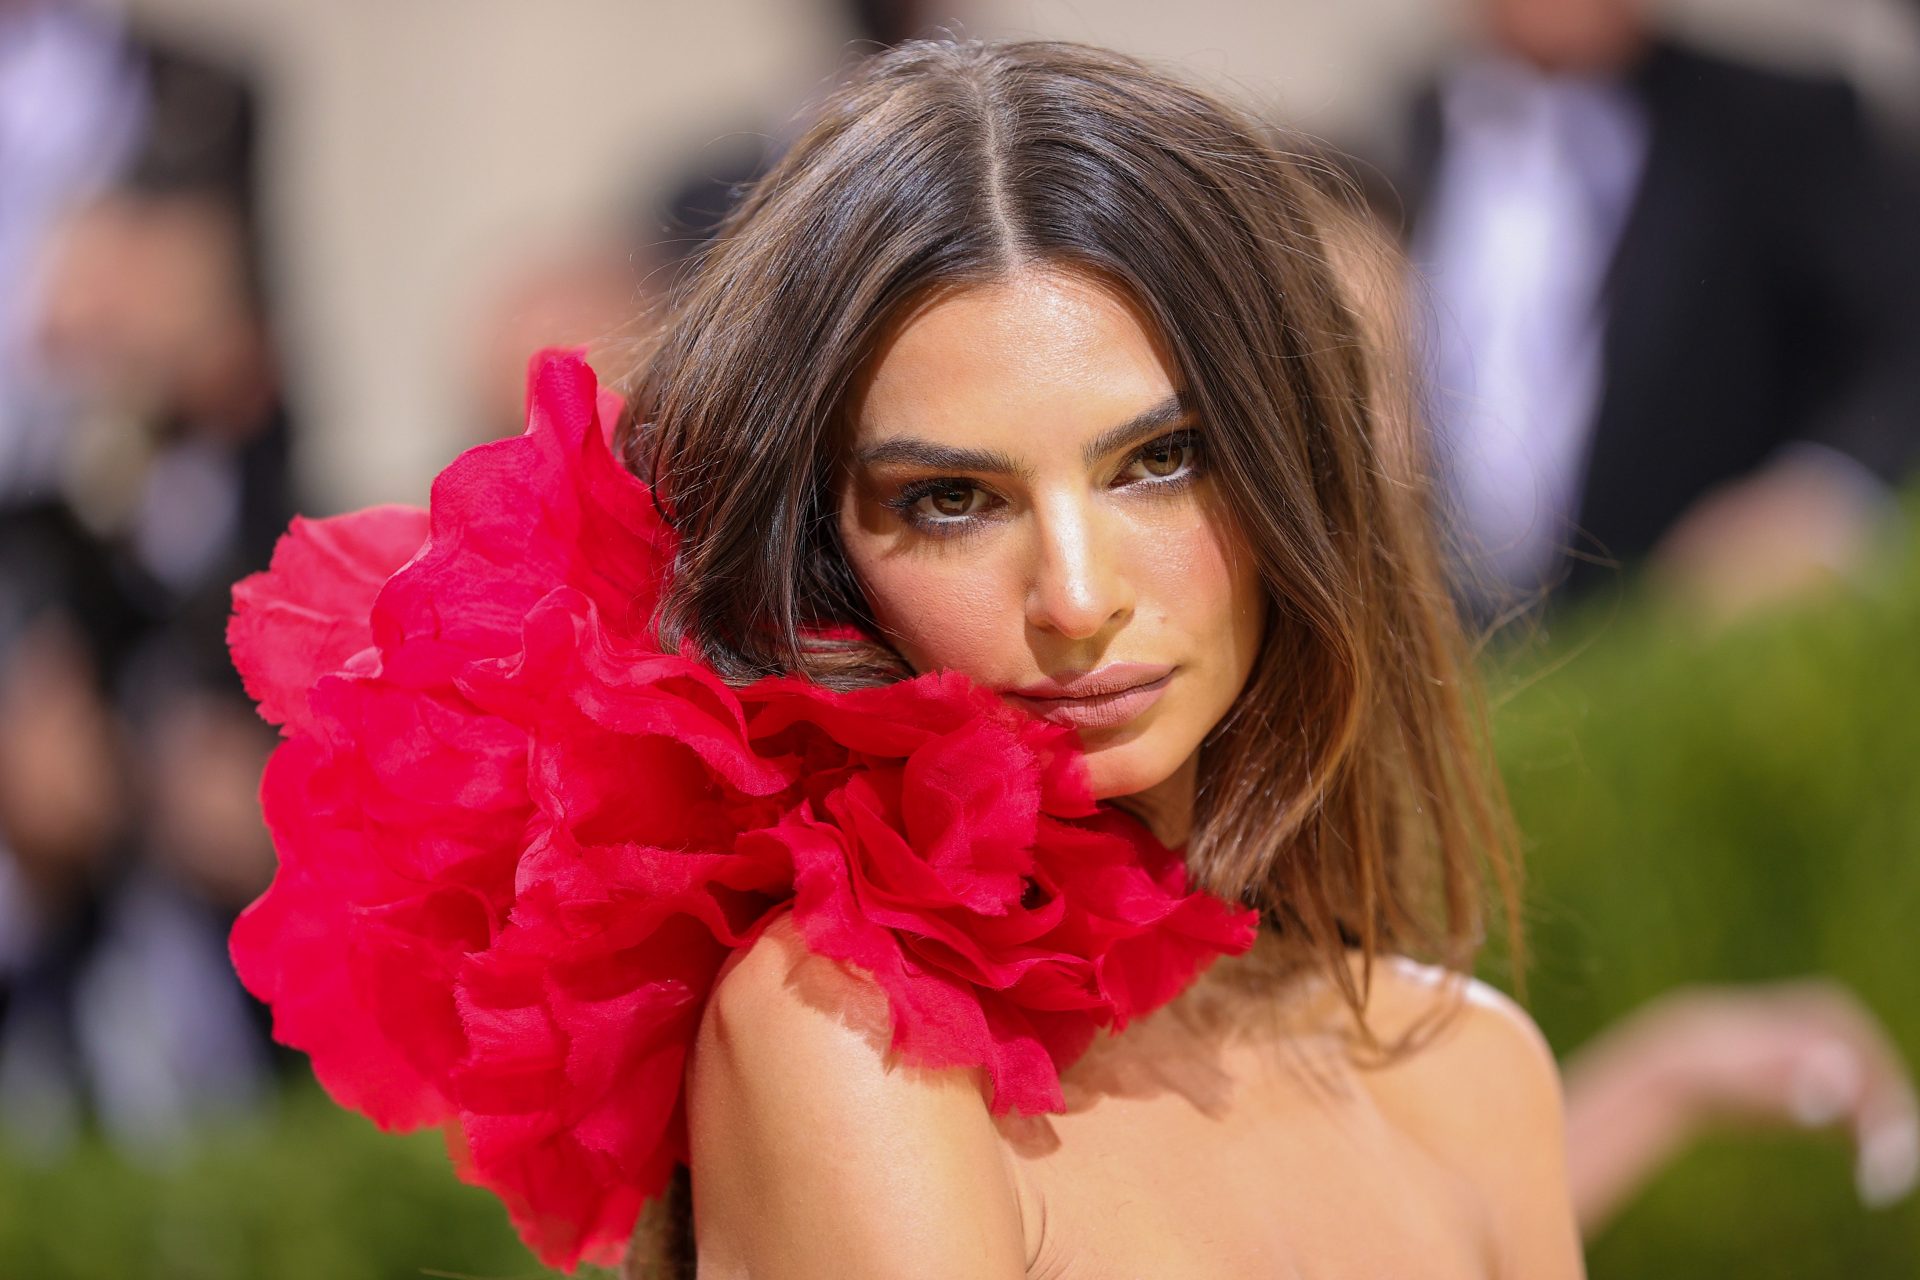 Emily Ratajkowski Factual Shared Photos of Her Son’s Face for the First Time